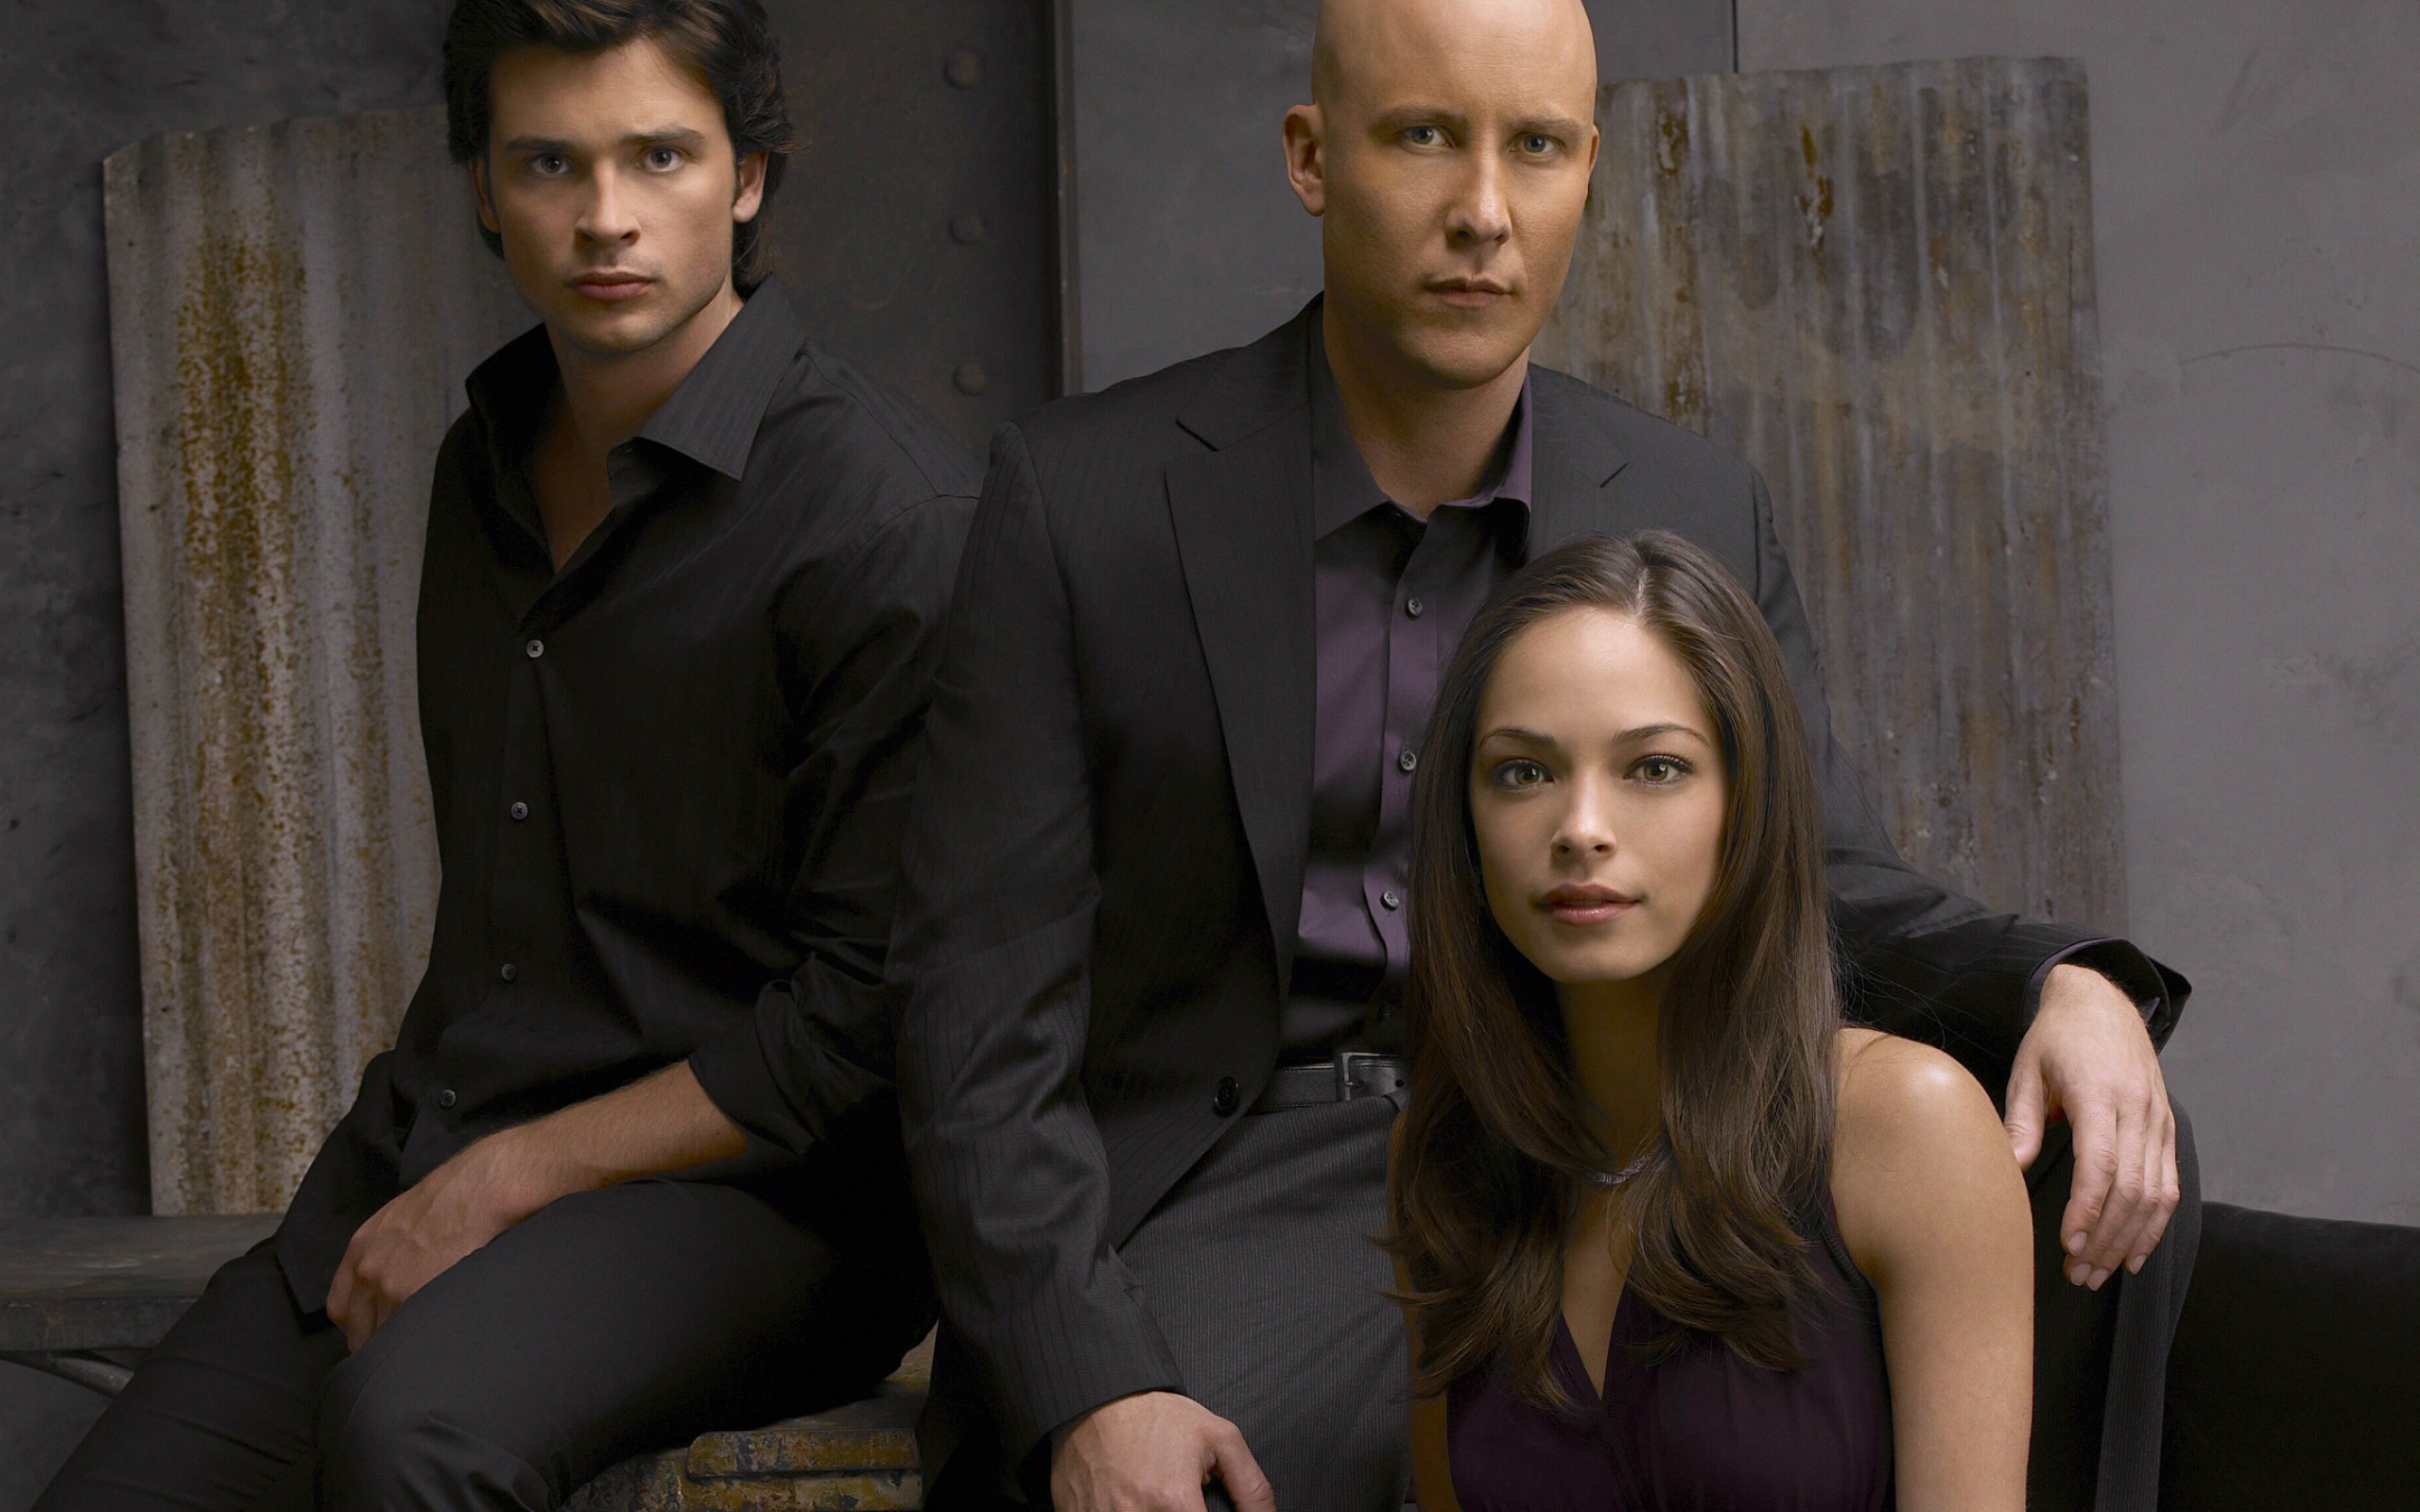 Smallville (TV Series): Lana, Lex and Clark, The story of teenagers living in Kansas, A tremendous success. 2560x1600 HD Background.